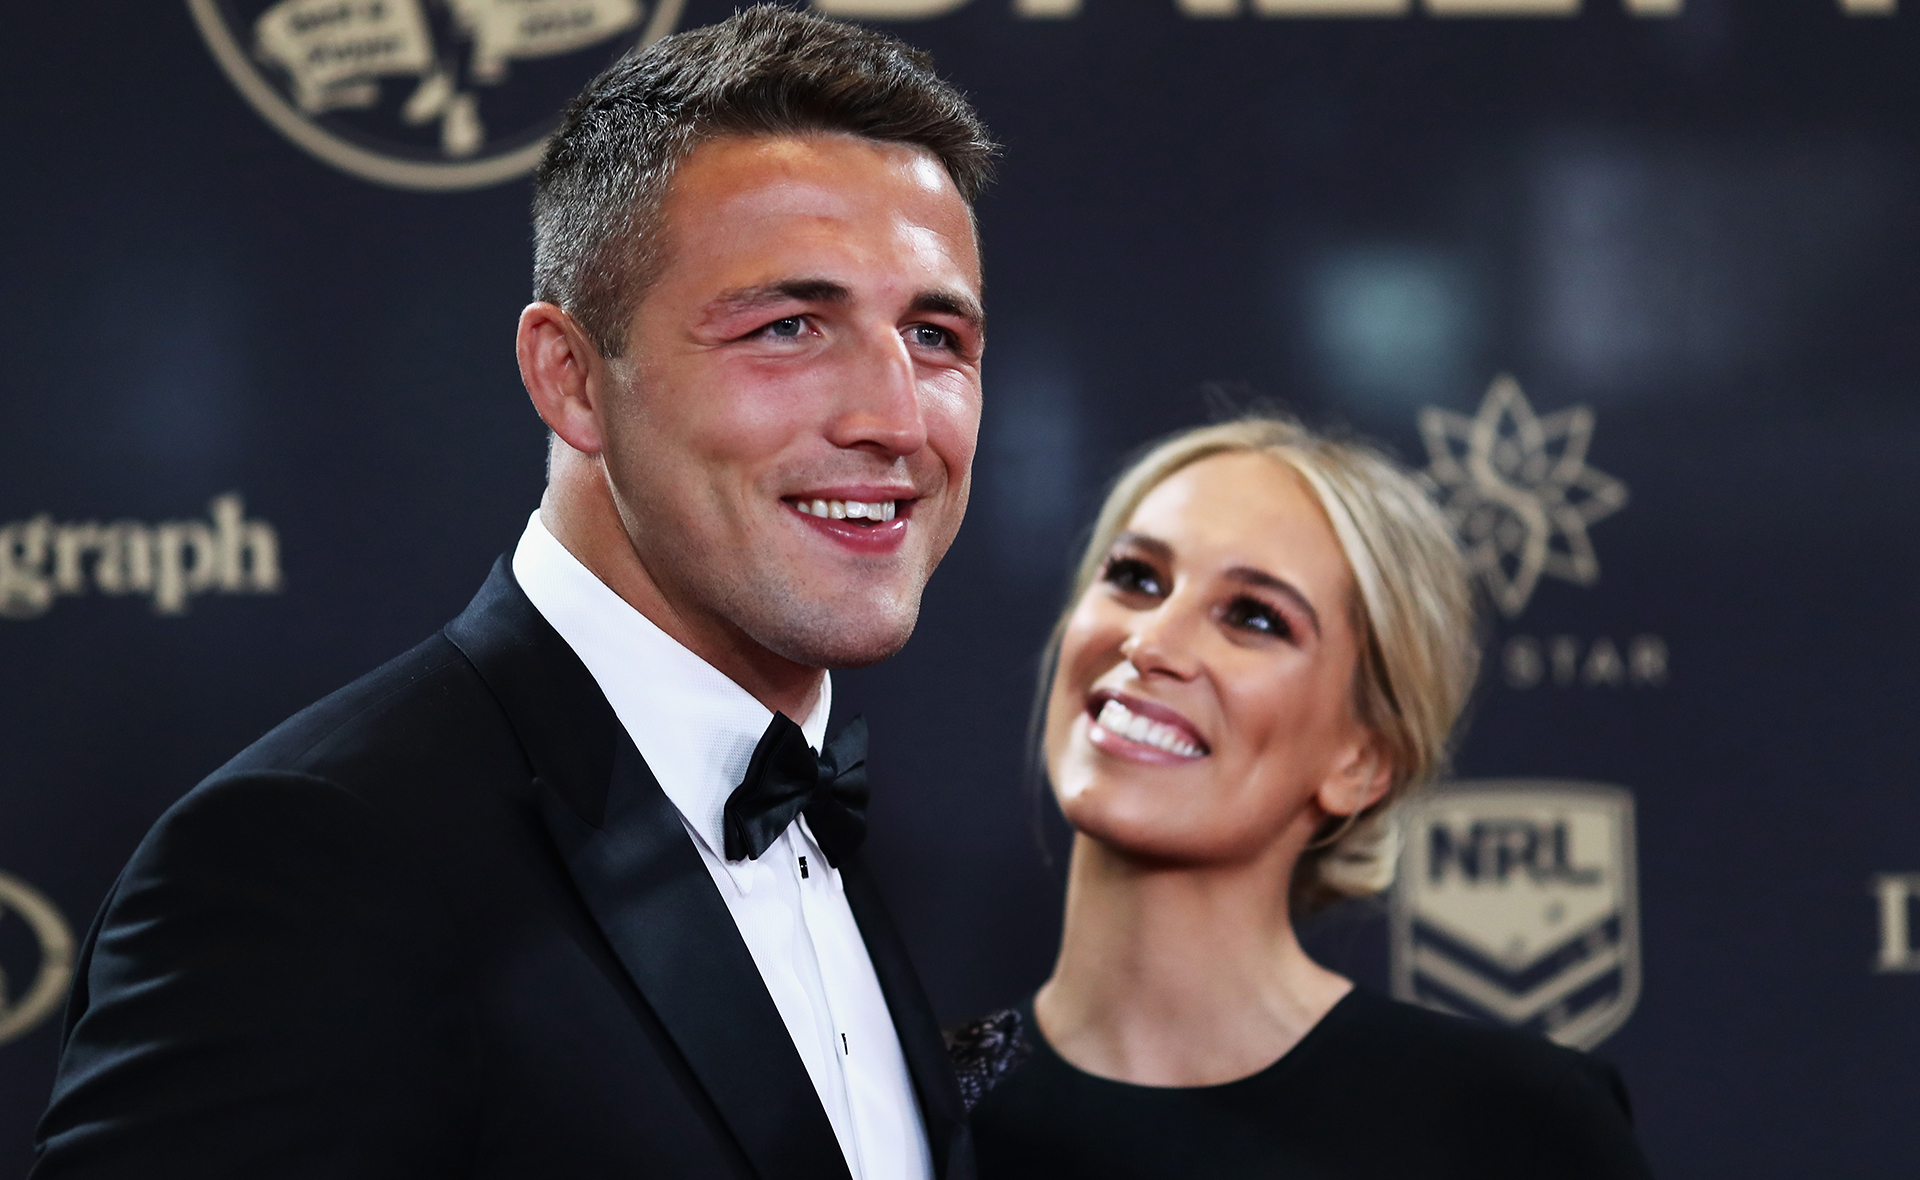 The dramatic rise and fall of Sam and Phoebe Burgess’ relationship